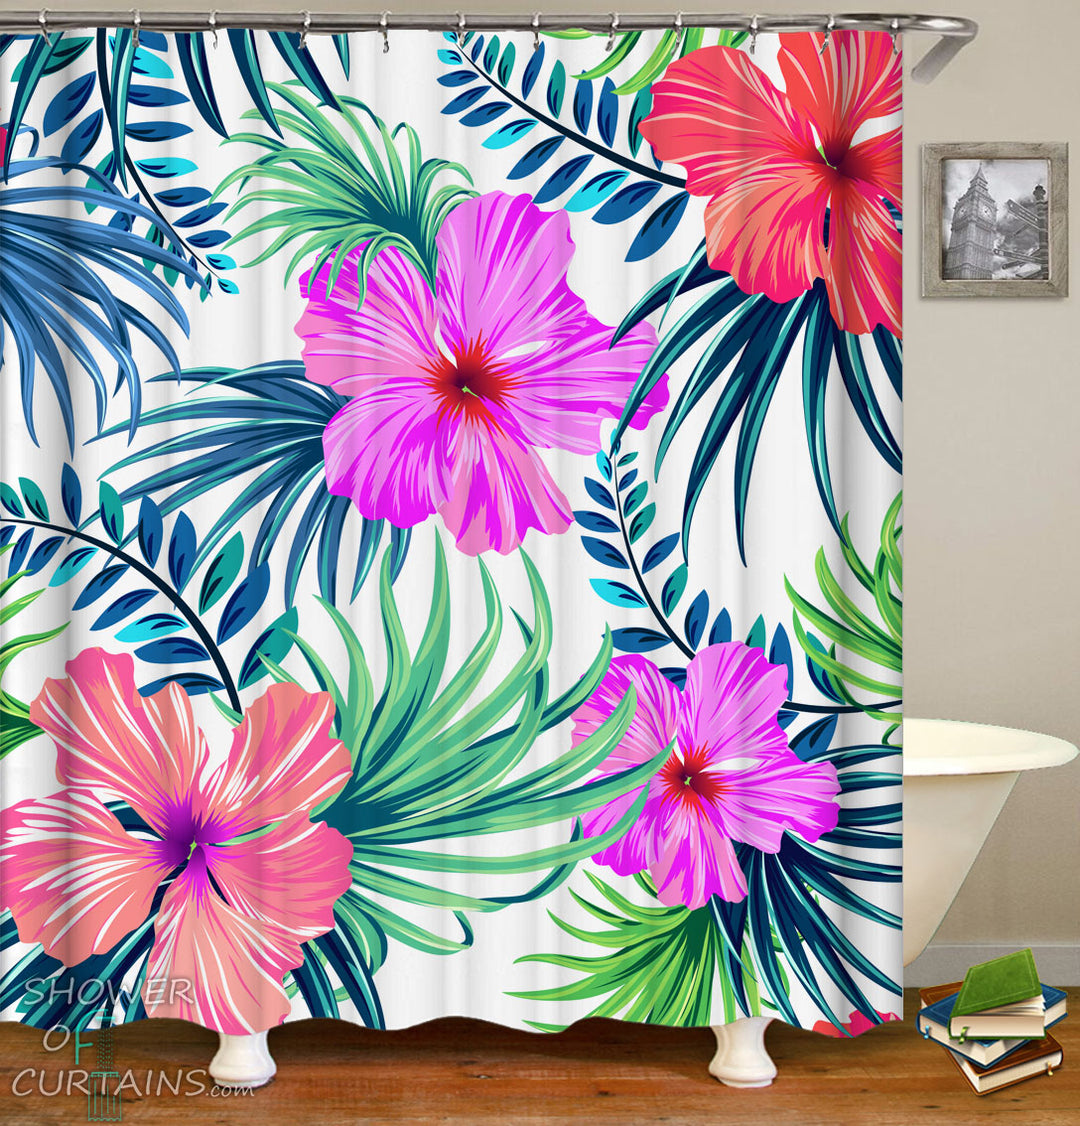 Tropical Shower Curtains of Giant Tropical Flowers